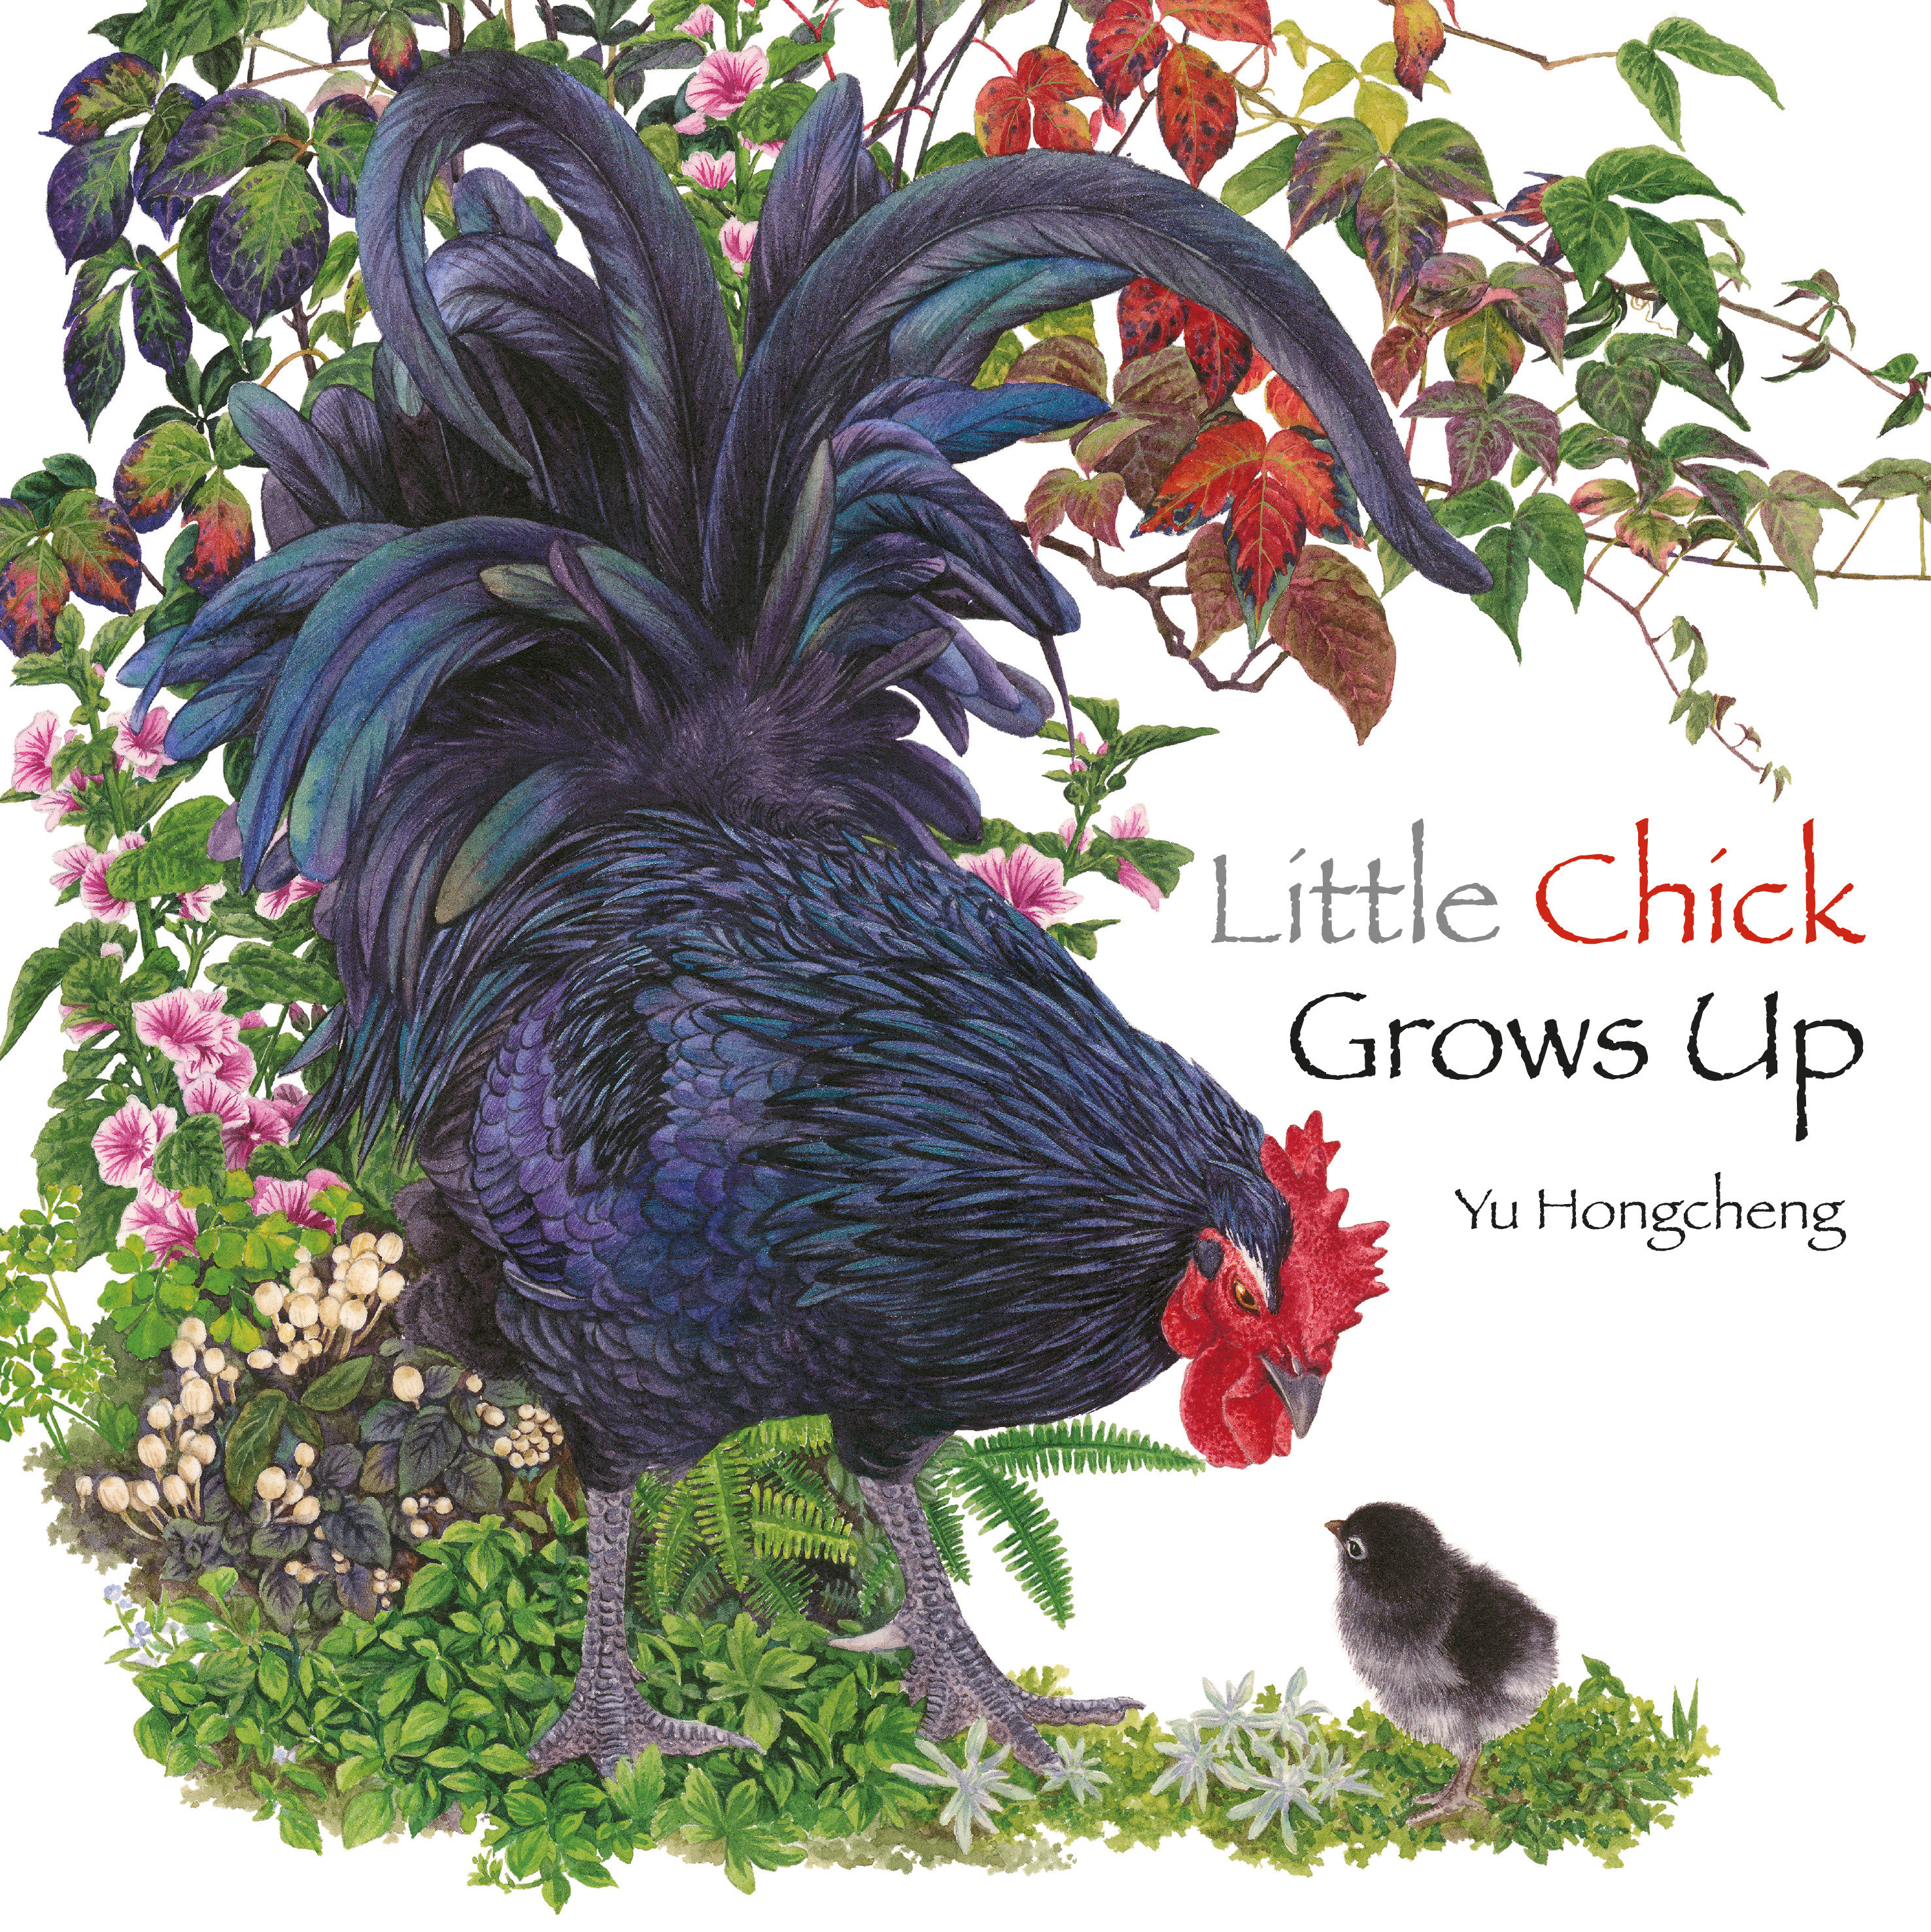 Little Chick Grows Up (Hardcover Book)